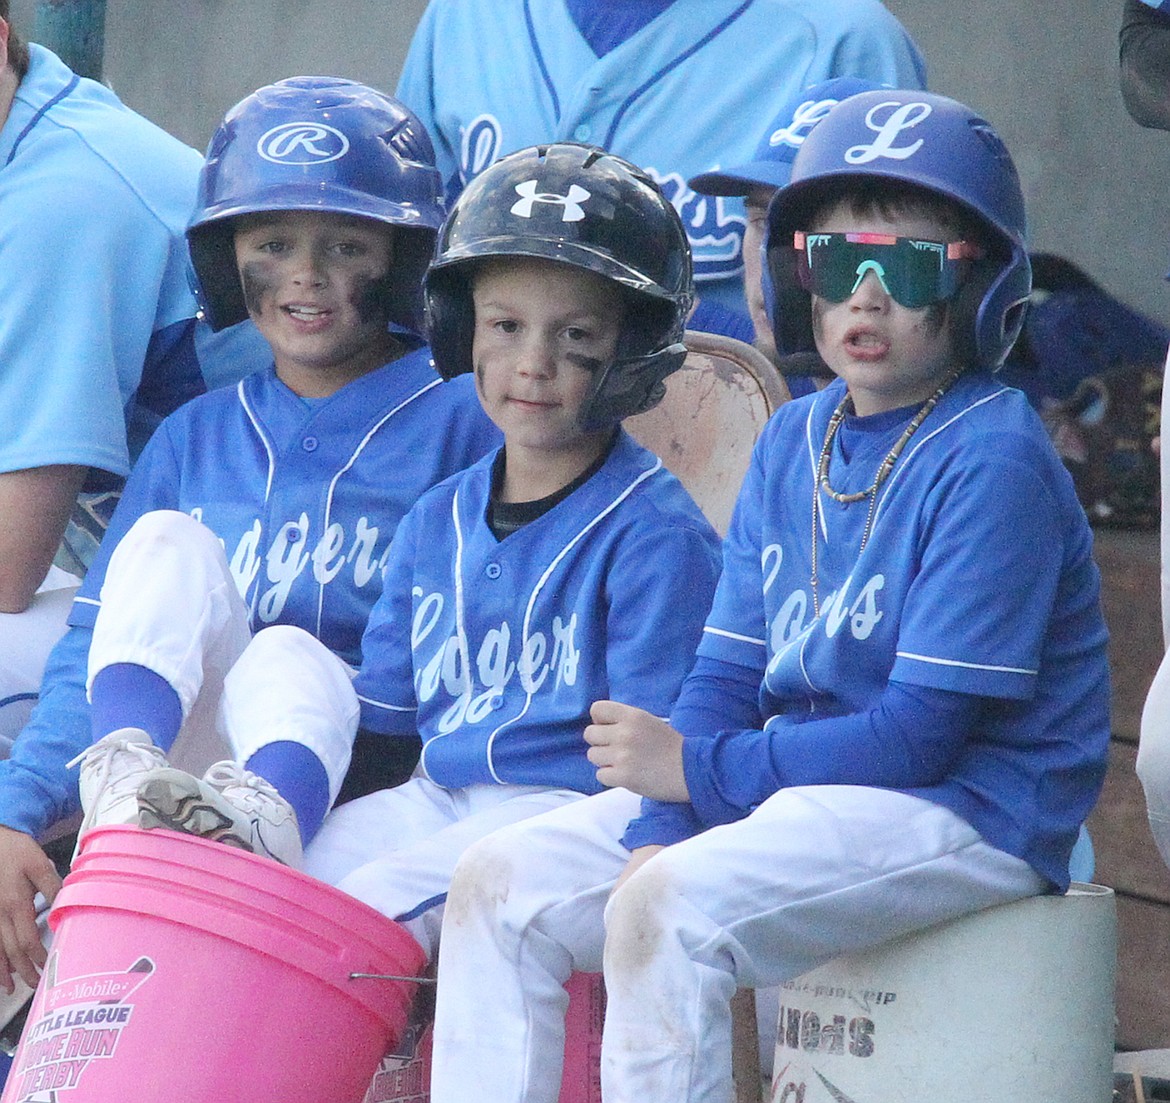 The Cutest bat boys this side of the Great Divide. (Paul Sievers/The Western News)